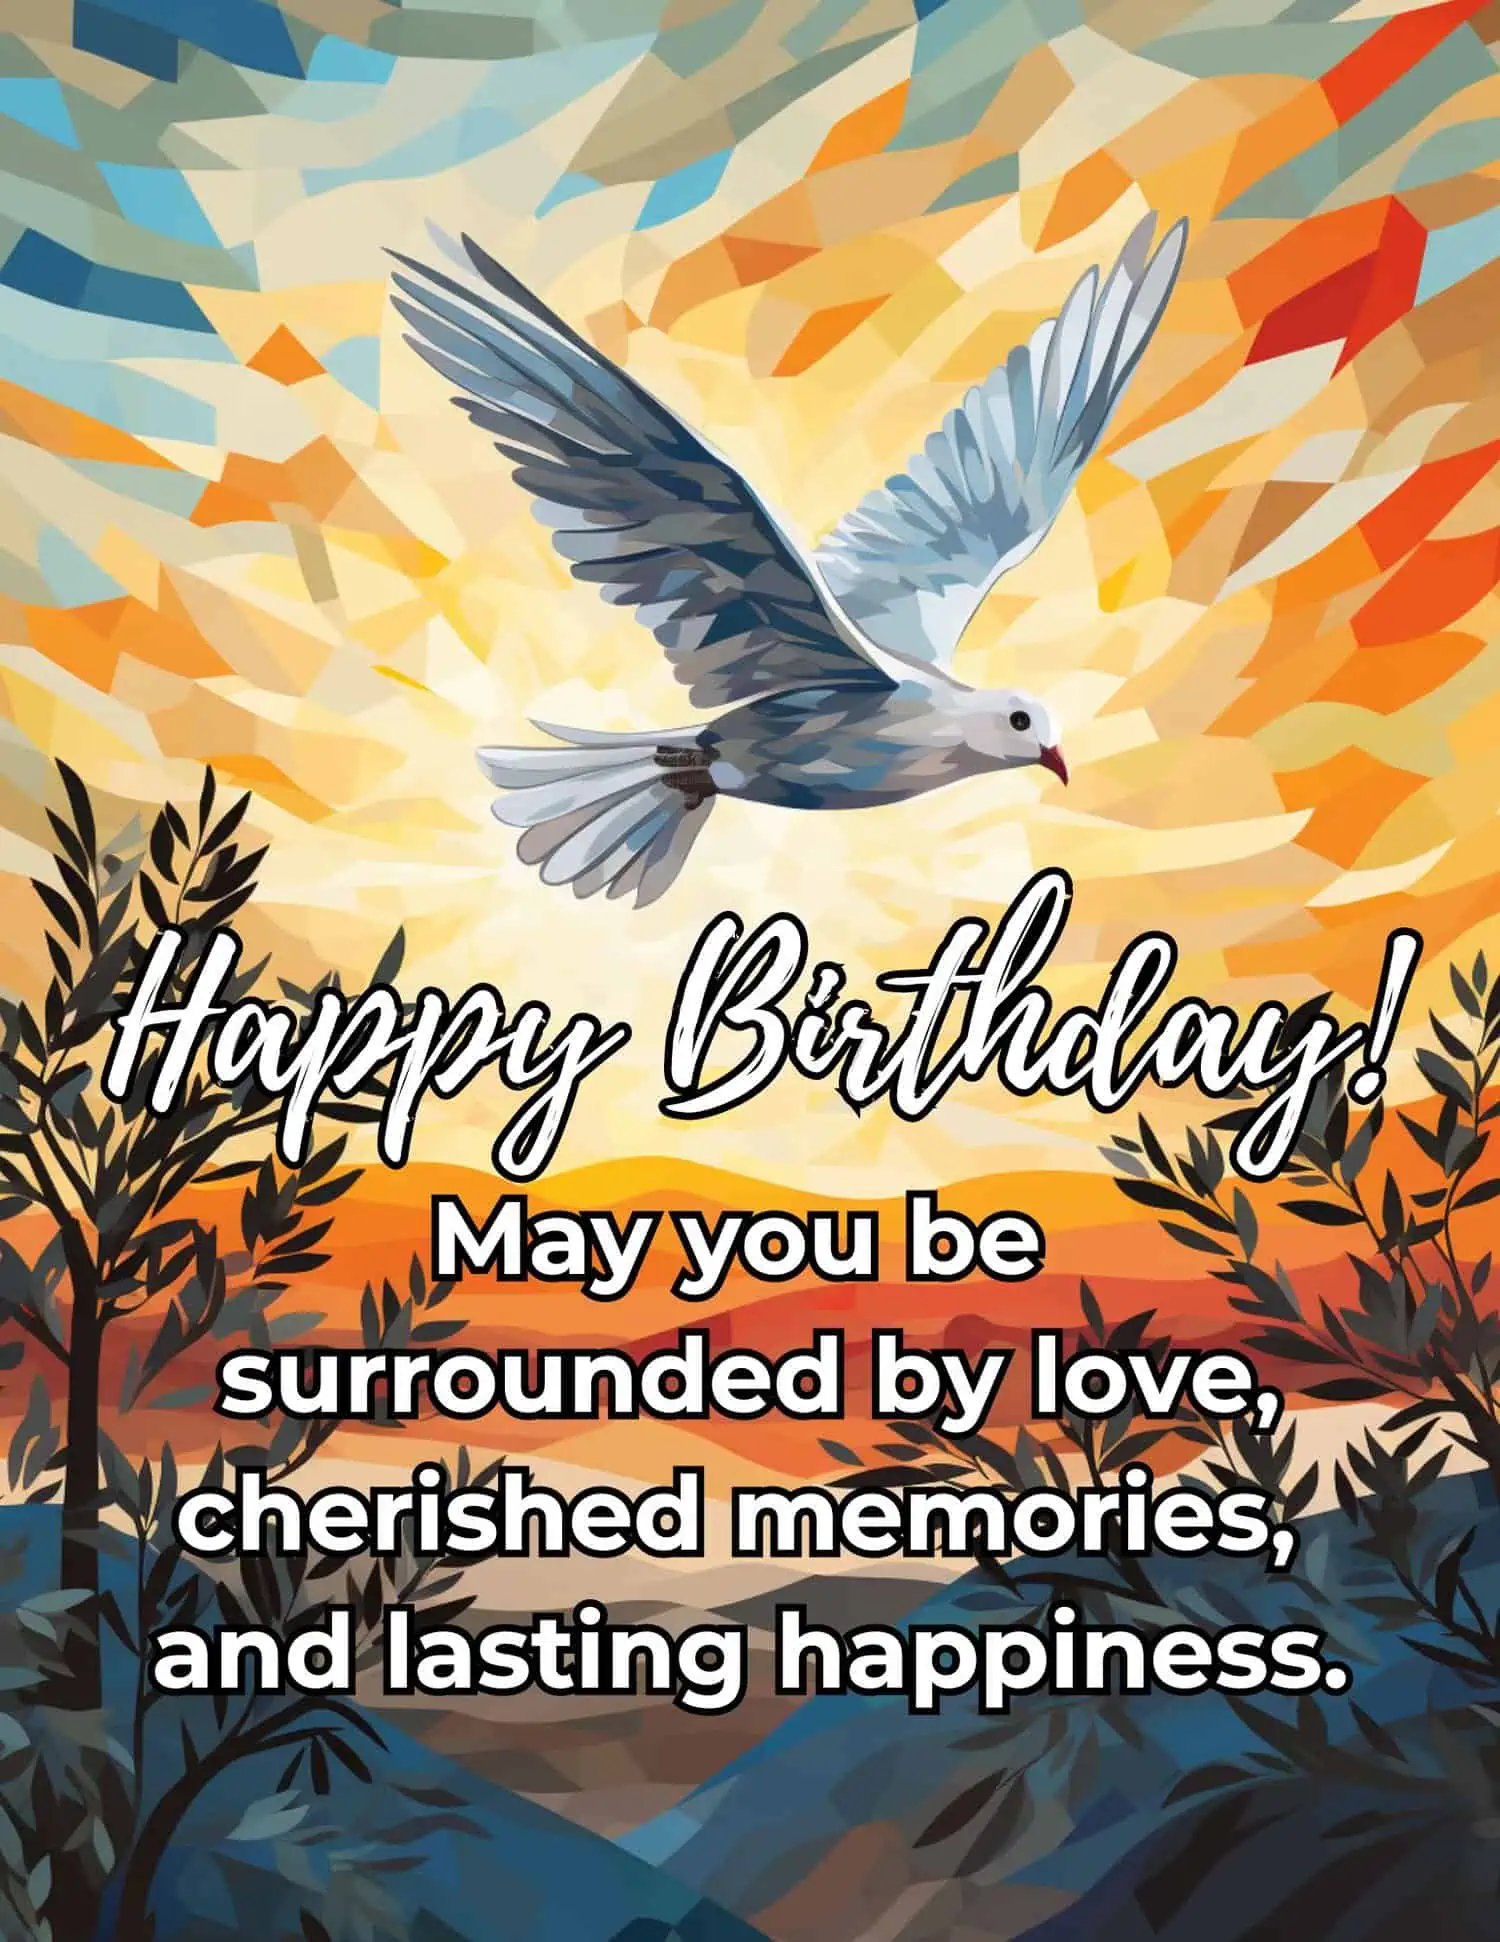 A touching collection of emotional birthday prayers and blessings, filled with heartfelt wishes for love, joy, and prosperity.